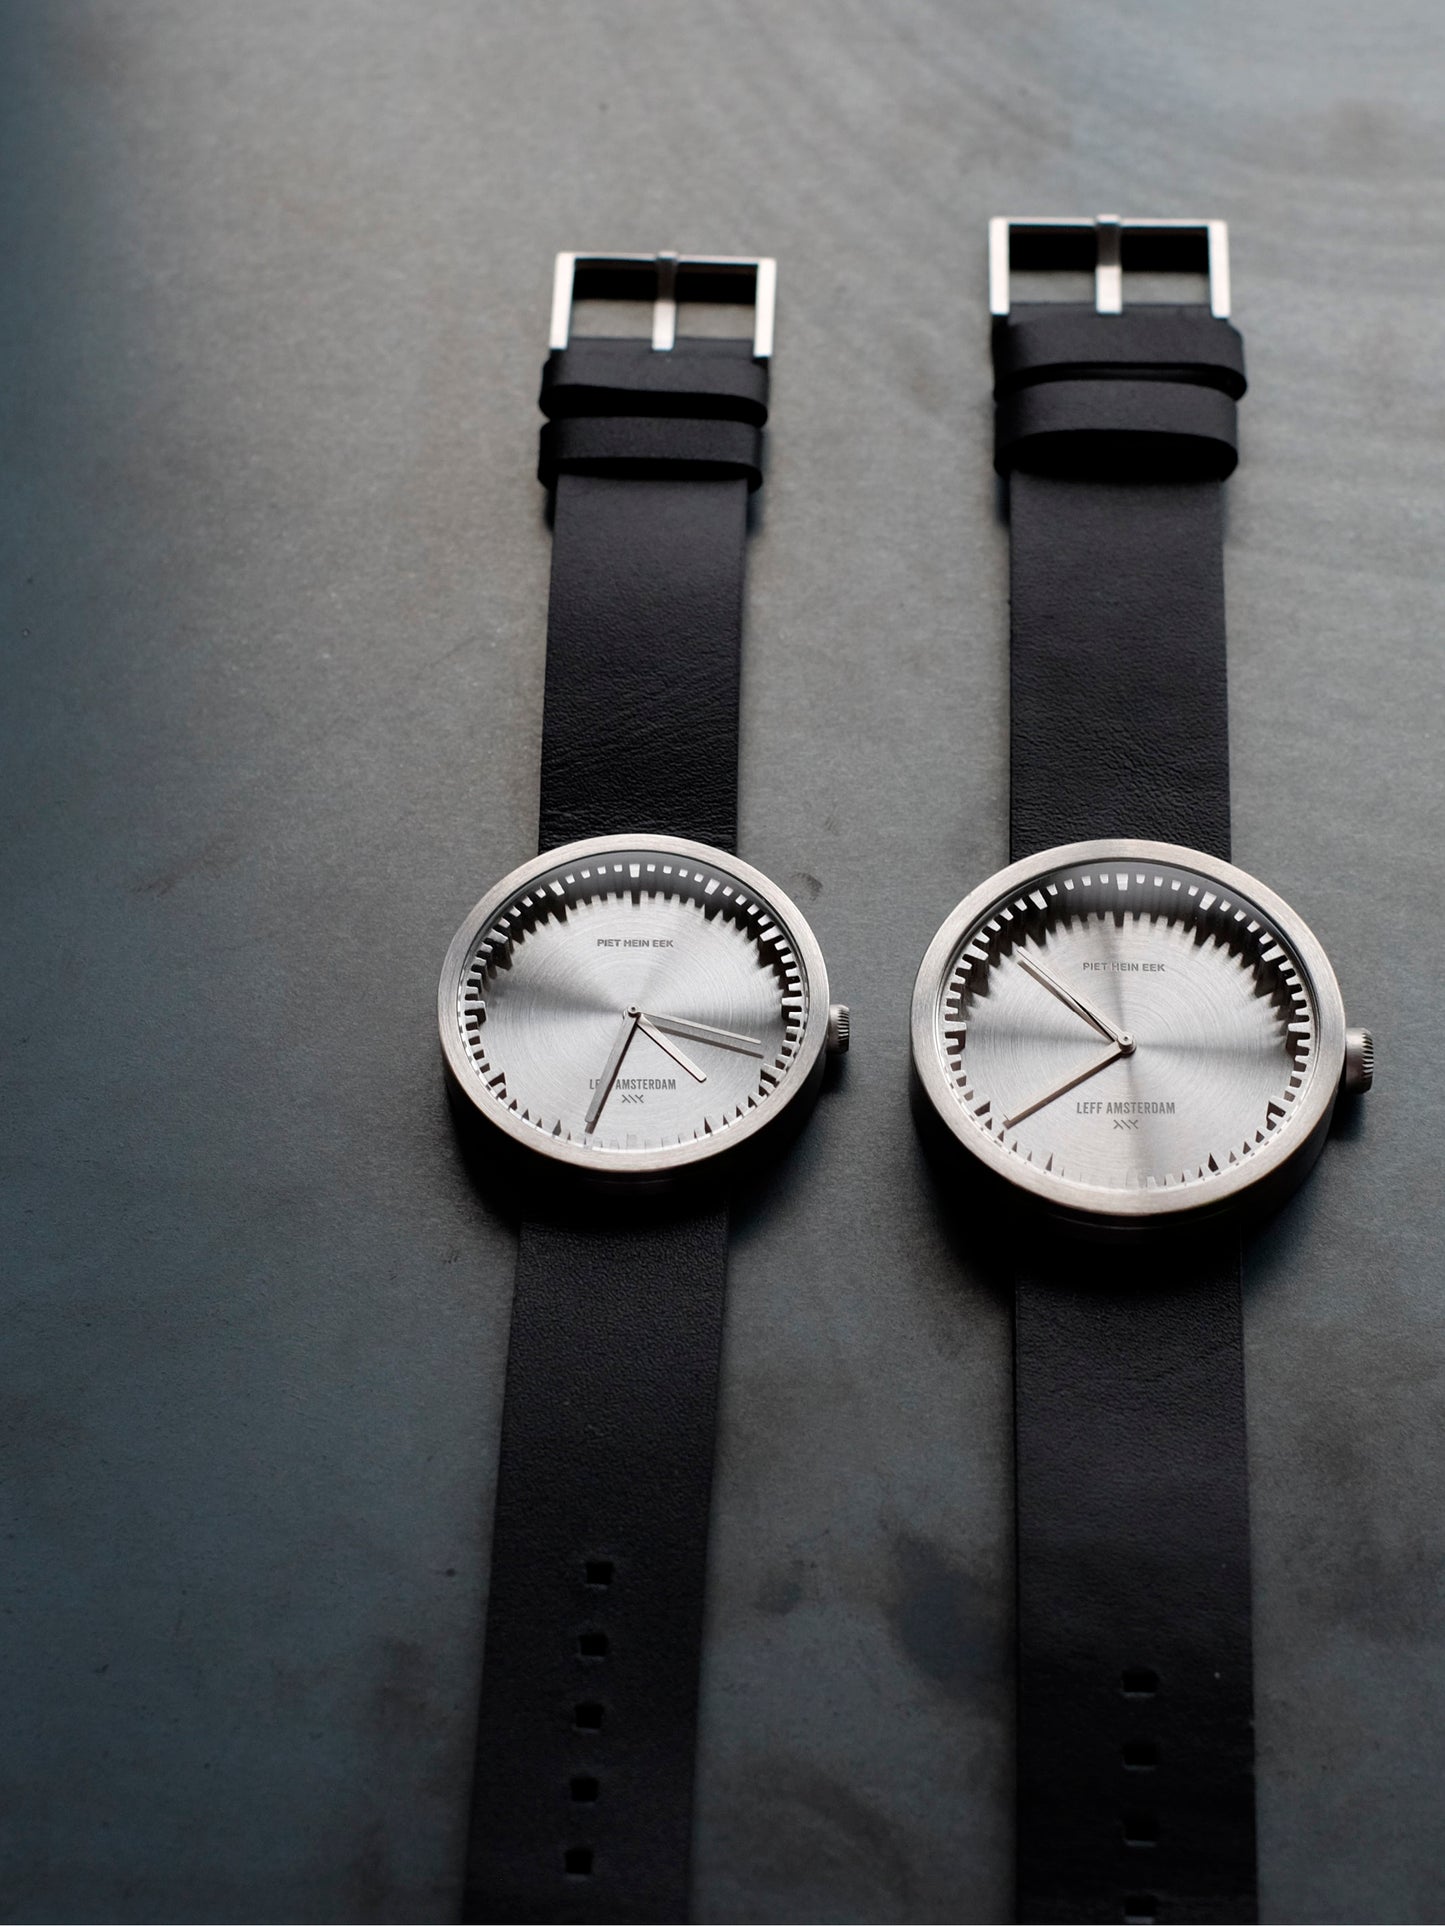 LEFF Amsterdam Tube Watch D38 Stainless Steel Case Black Leather Strap